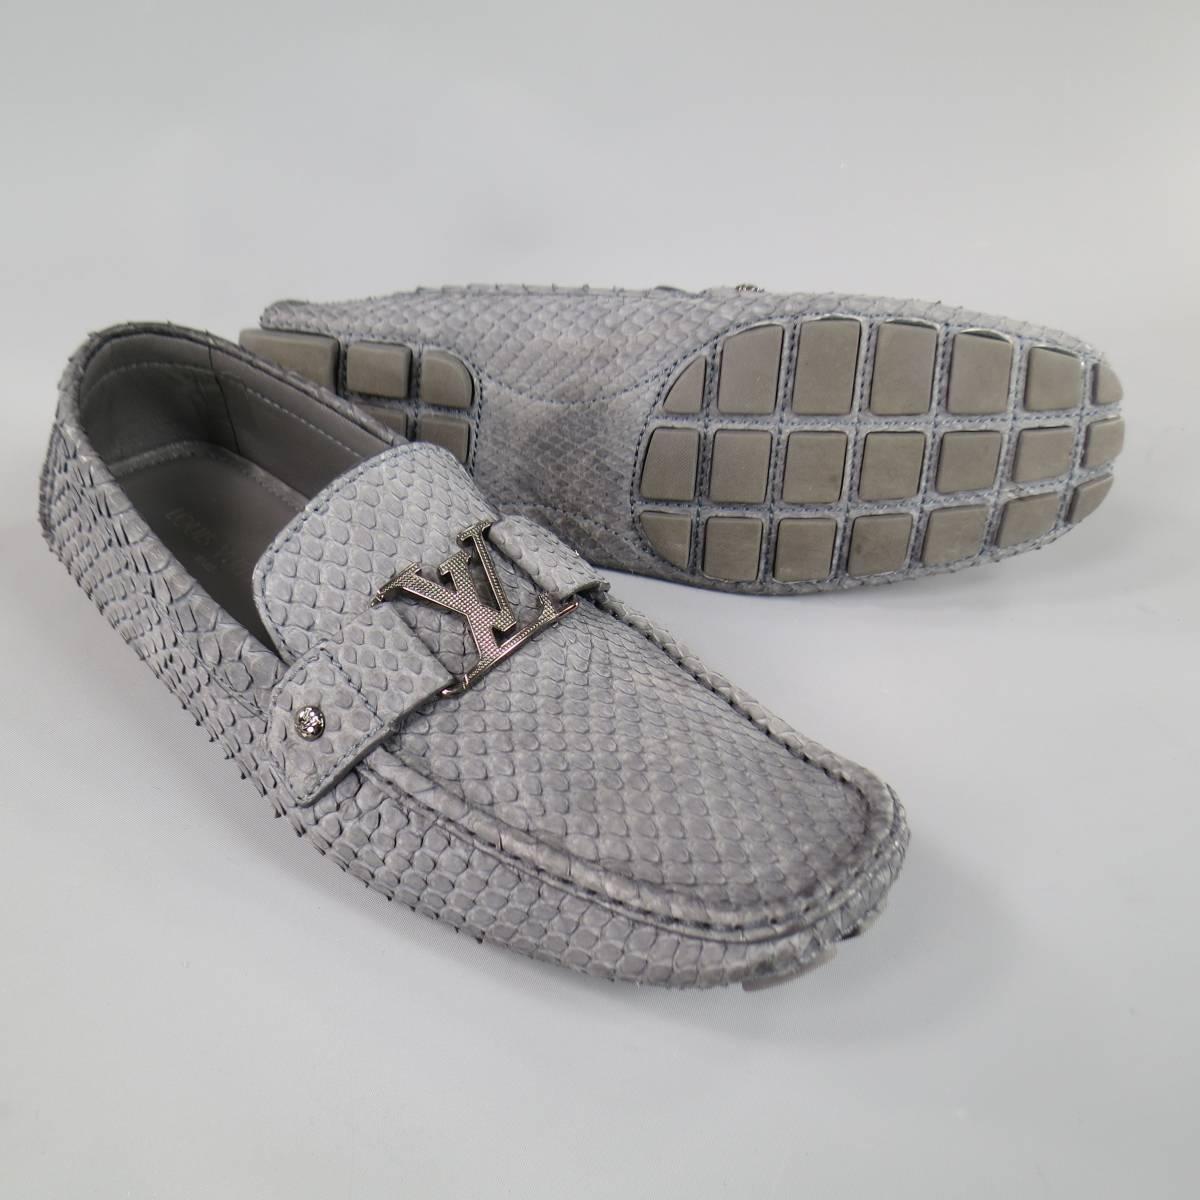 LOUIS VUITTON Size 12.5 Gray Snake Skin LV Driver Loafers at 1stdibs